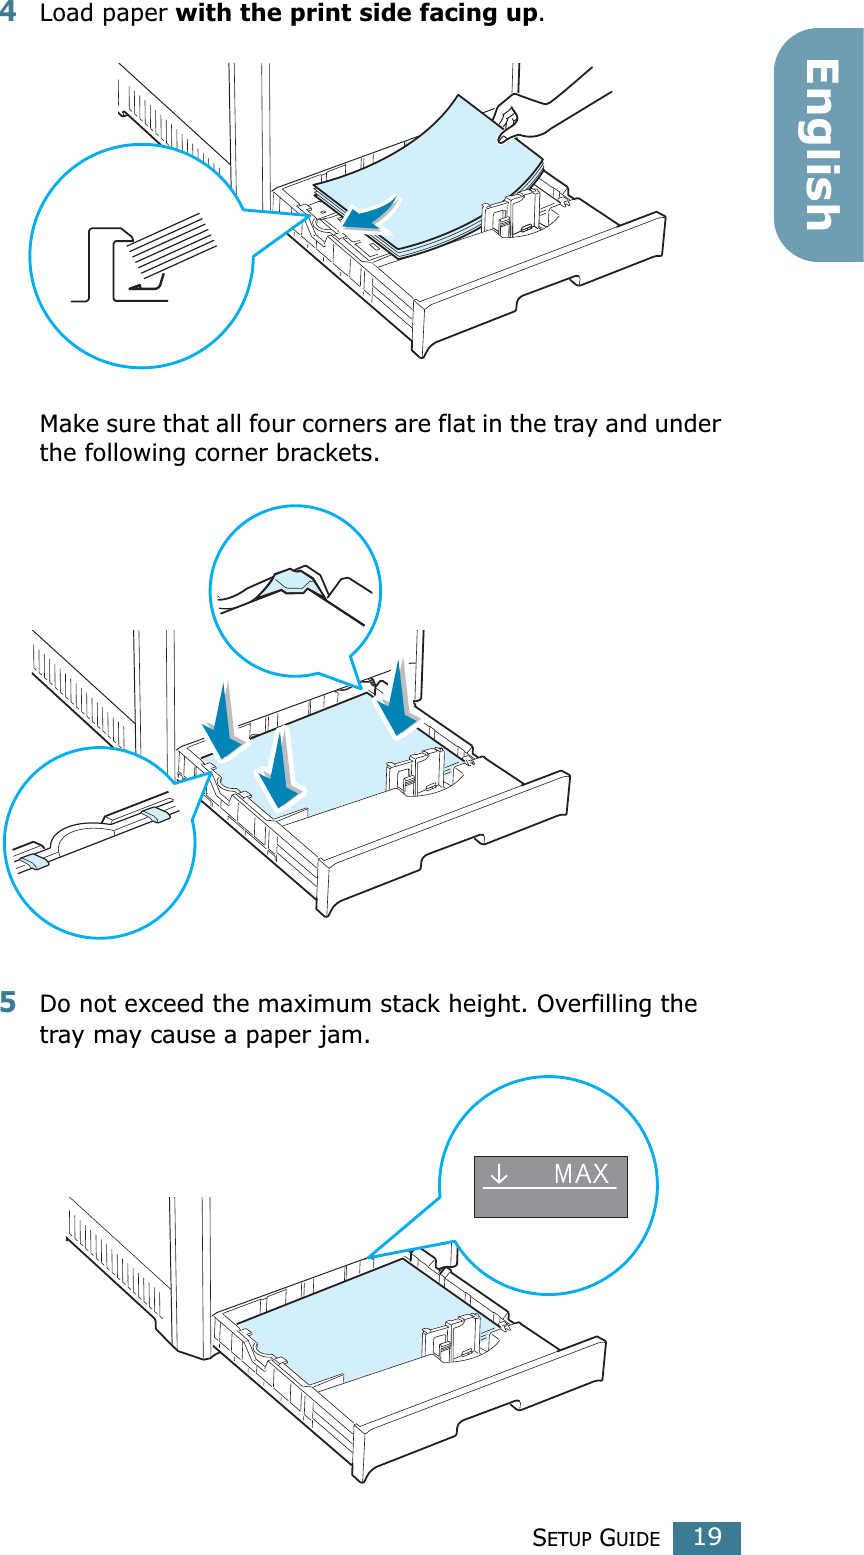 SETUP GUIDE19English4Load paper with the print side facing up.Make sure that all four corners are flat in the tray and under the following corner brackets.5Do not exceed the maximum stack height. Overfilling the tray may cause a paper jam.